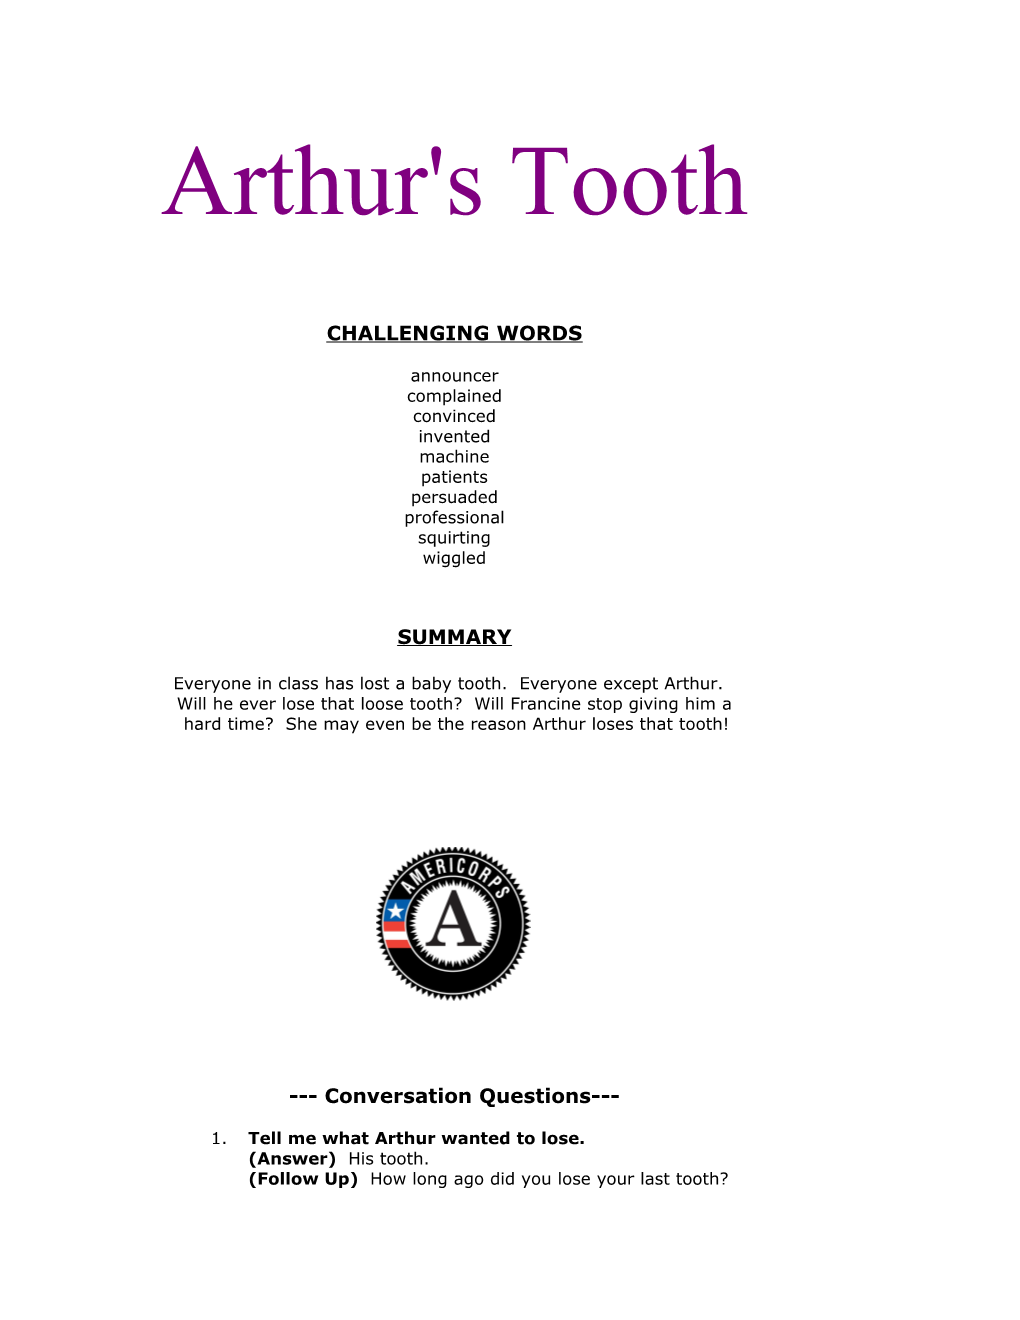 Everyone in Class Has Lost a Baby Tooth. Everyone Except Arthur